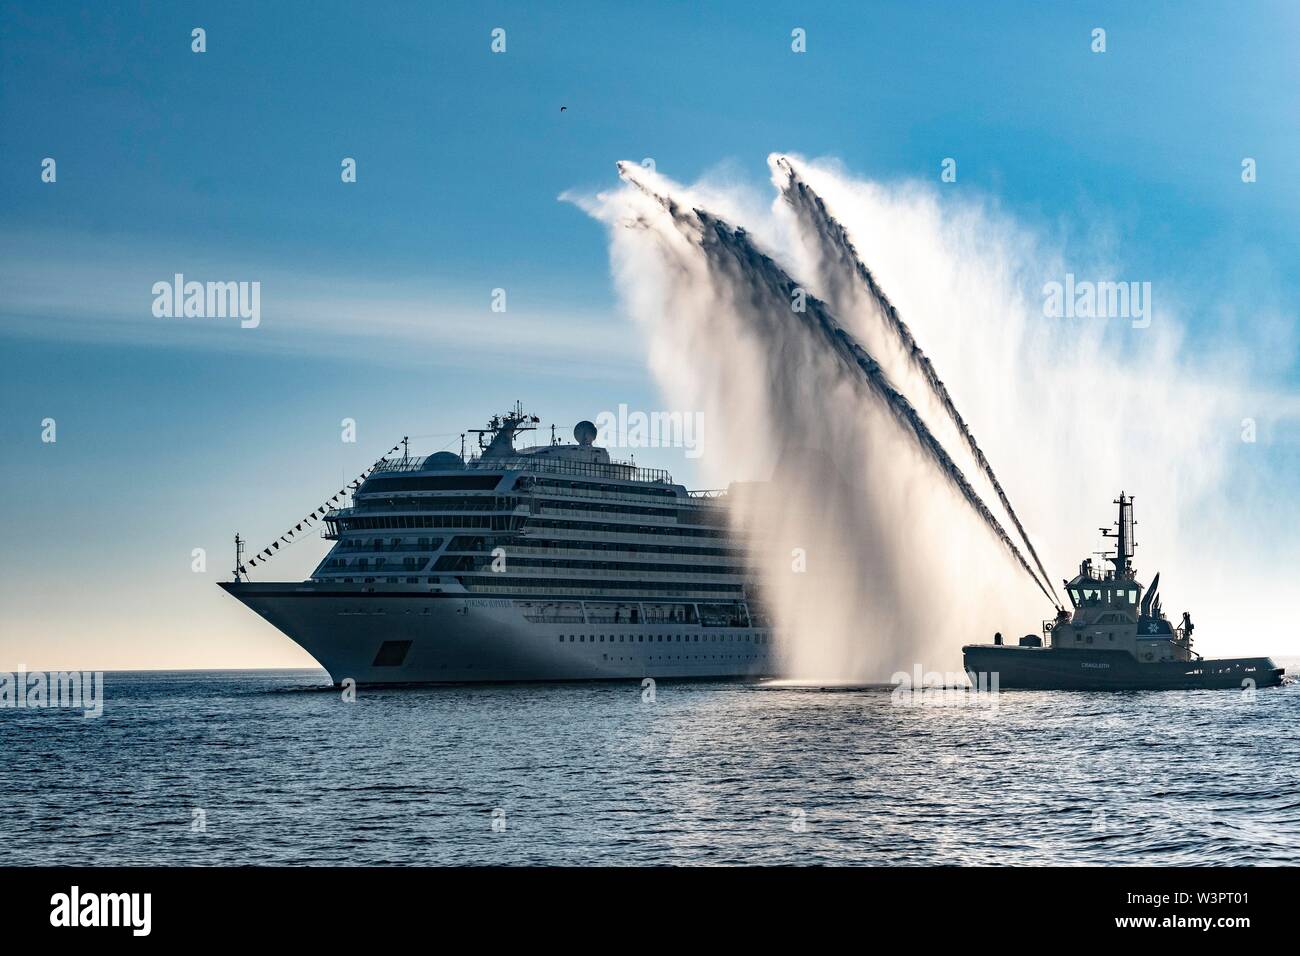 Viking Jupiter being welcomed to Scotland with a water cannon salute Stock Photo